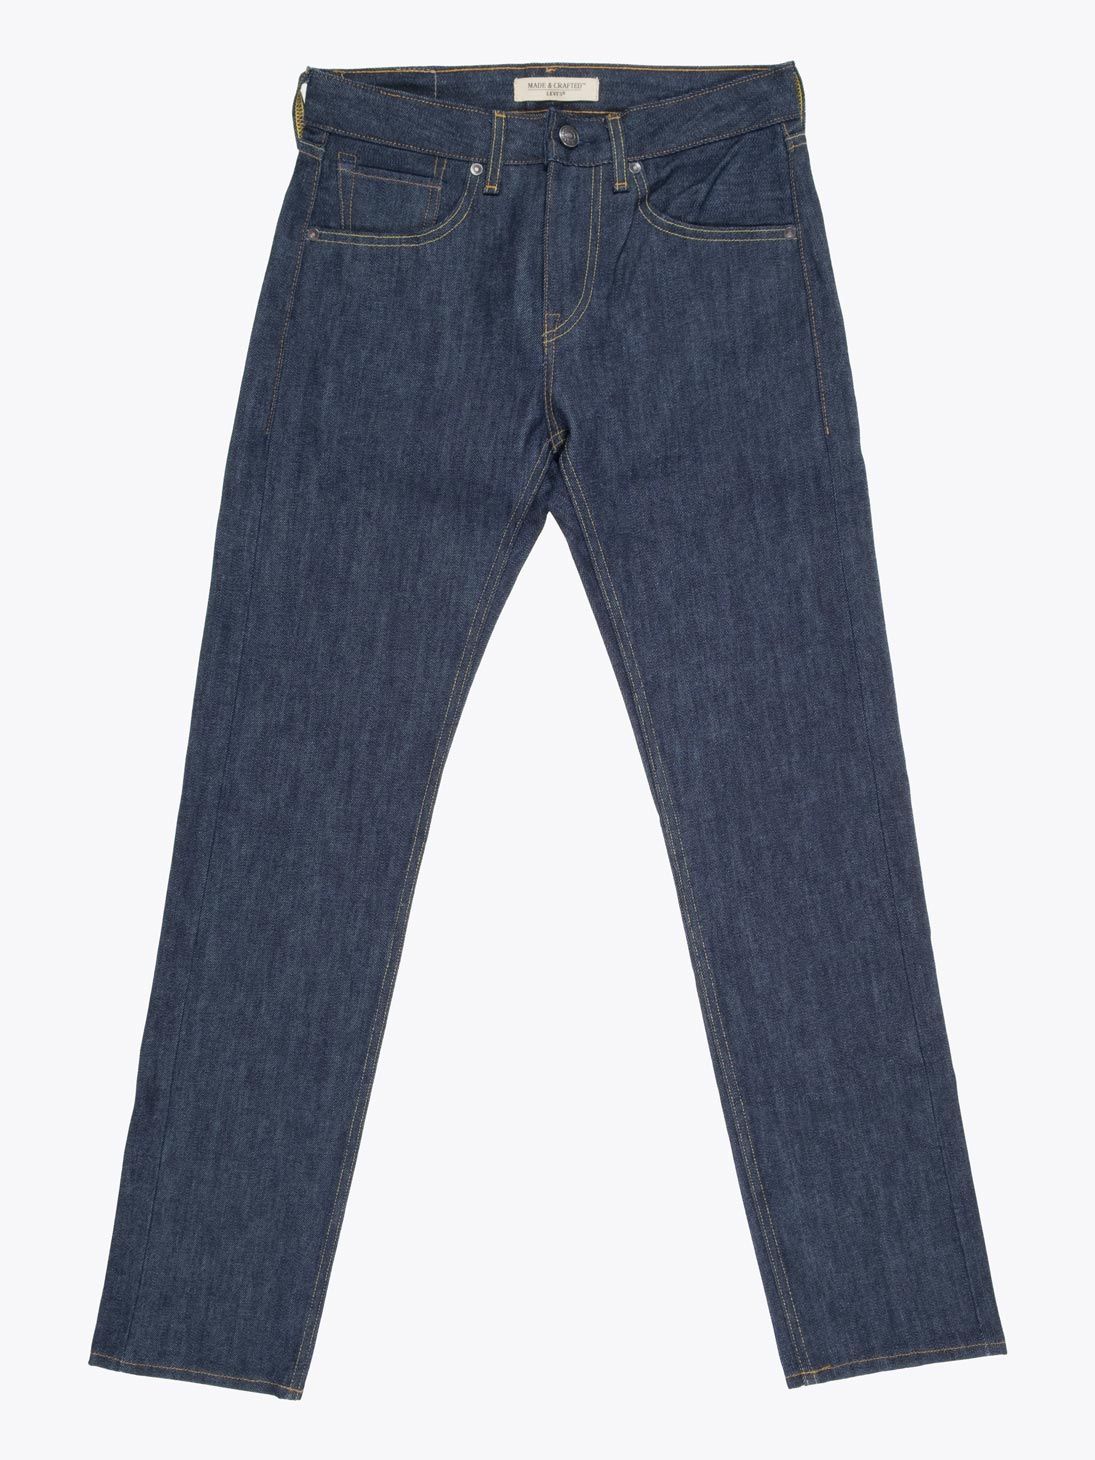 Sale 40% off - Levi's Made & Crafted Rigid Jeans - E35 Shop